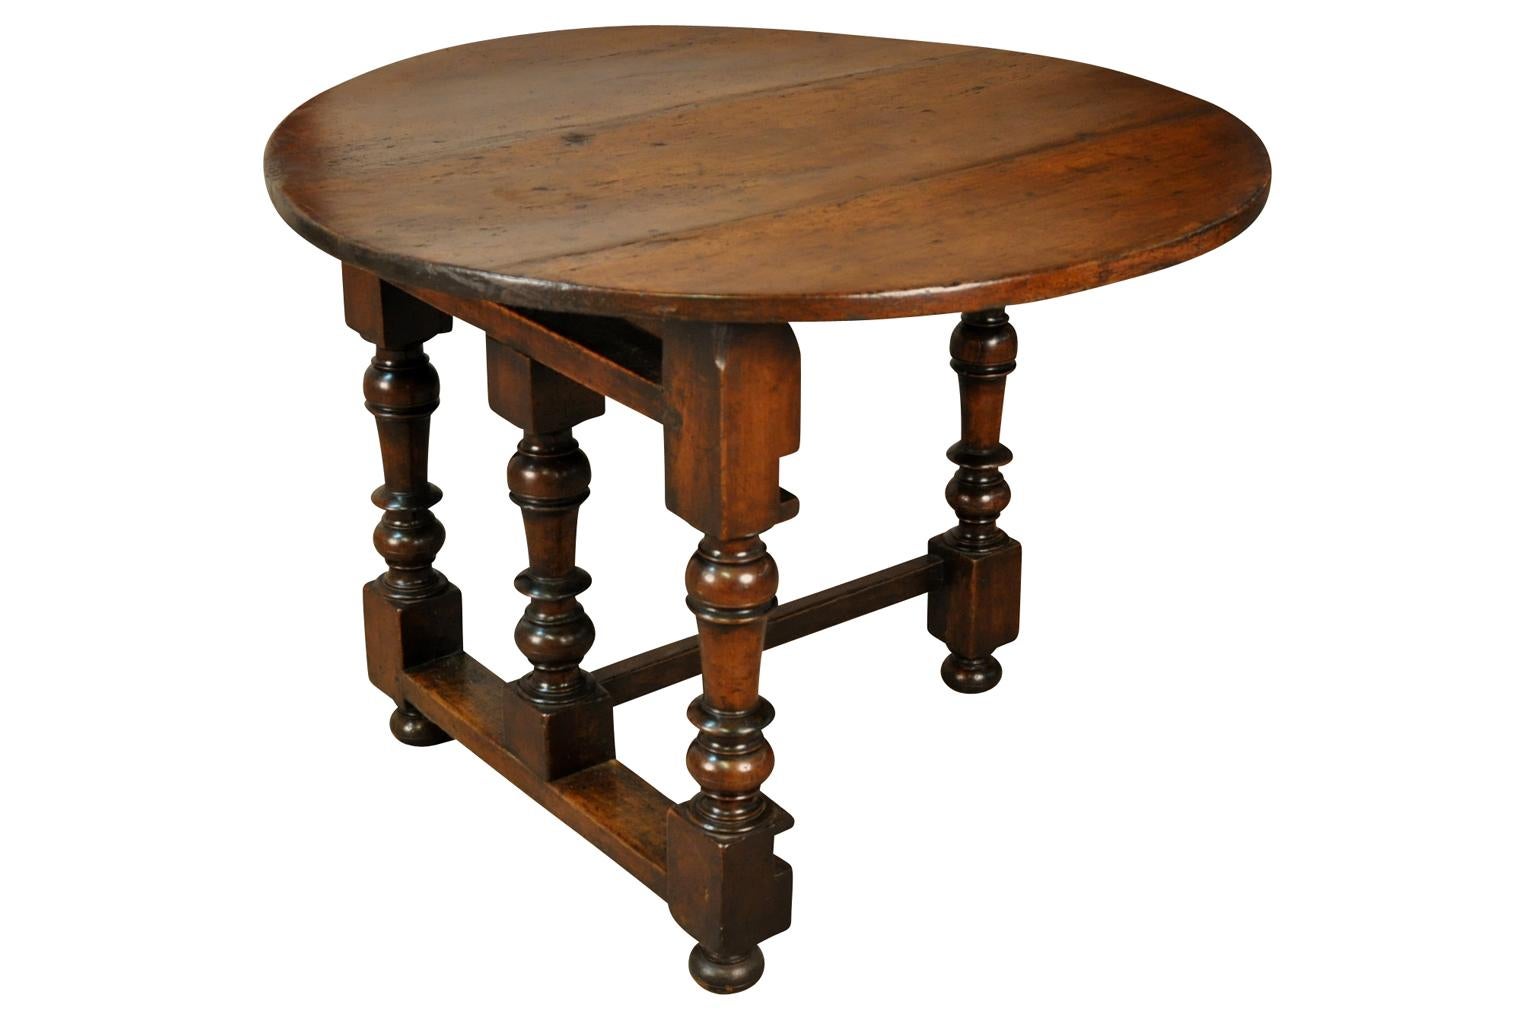 A very refined early 19th century wine tasting table - Table De Vigneron. Beautifully constructed from rich walnut with a very unique design. Gorgeous patina.